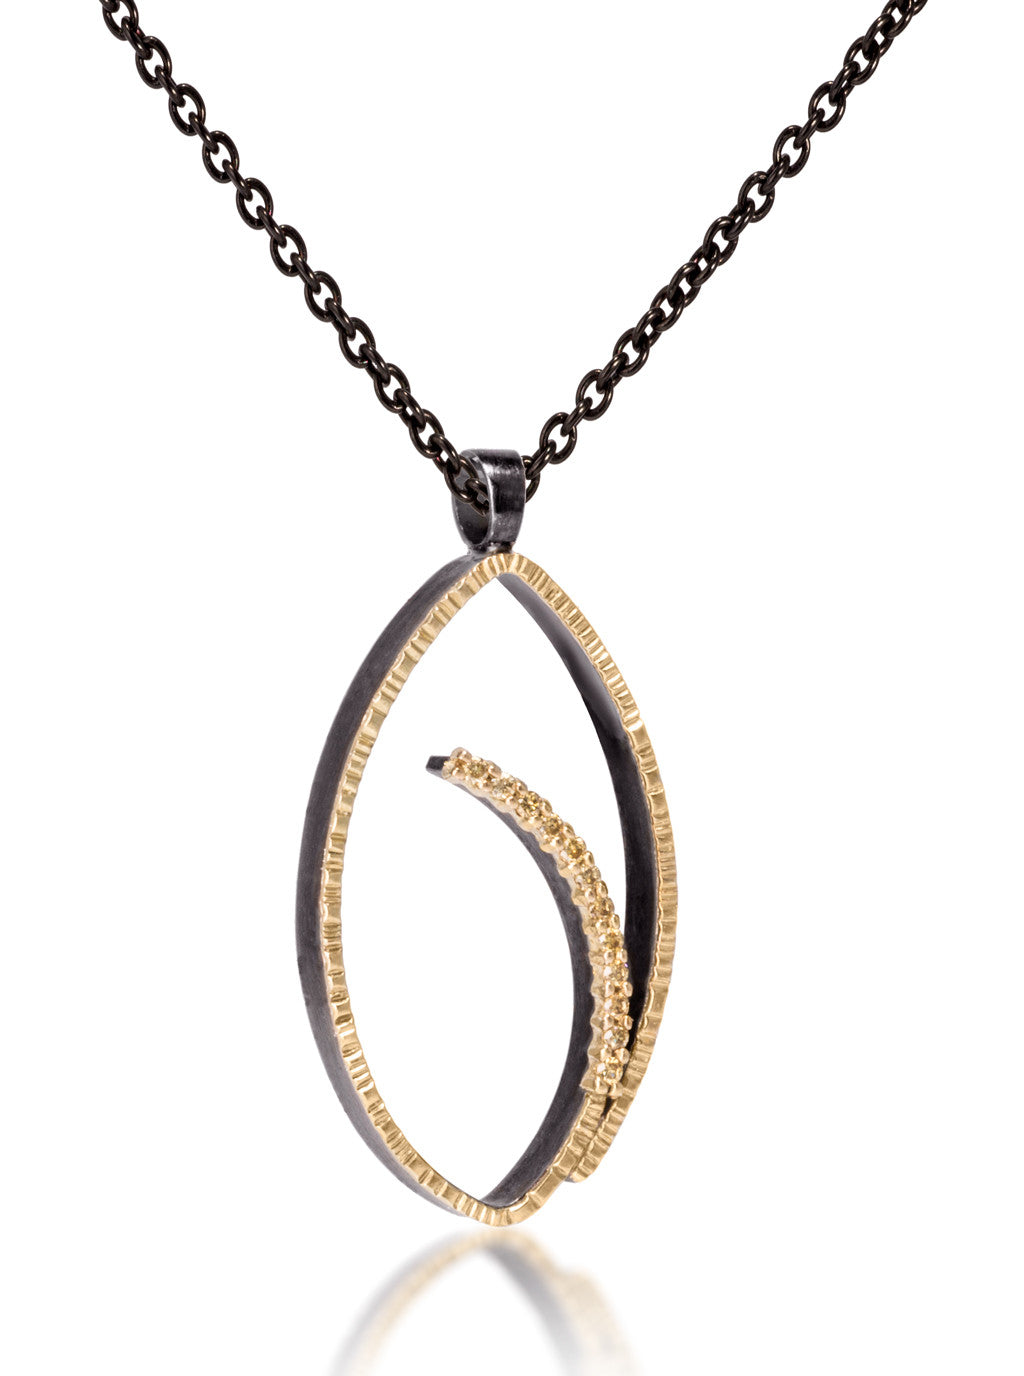 Tempest pendant #1-Large in 18k gold and oxidized sterling silver with prong set natural yellow diamonds. Forged, textured and fabricated by hand. 0.0864 tcw.